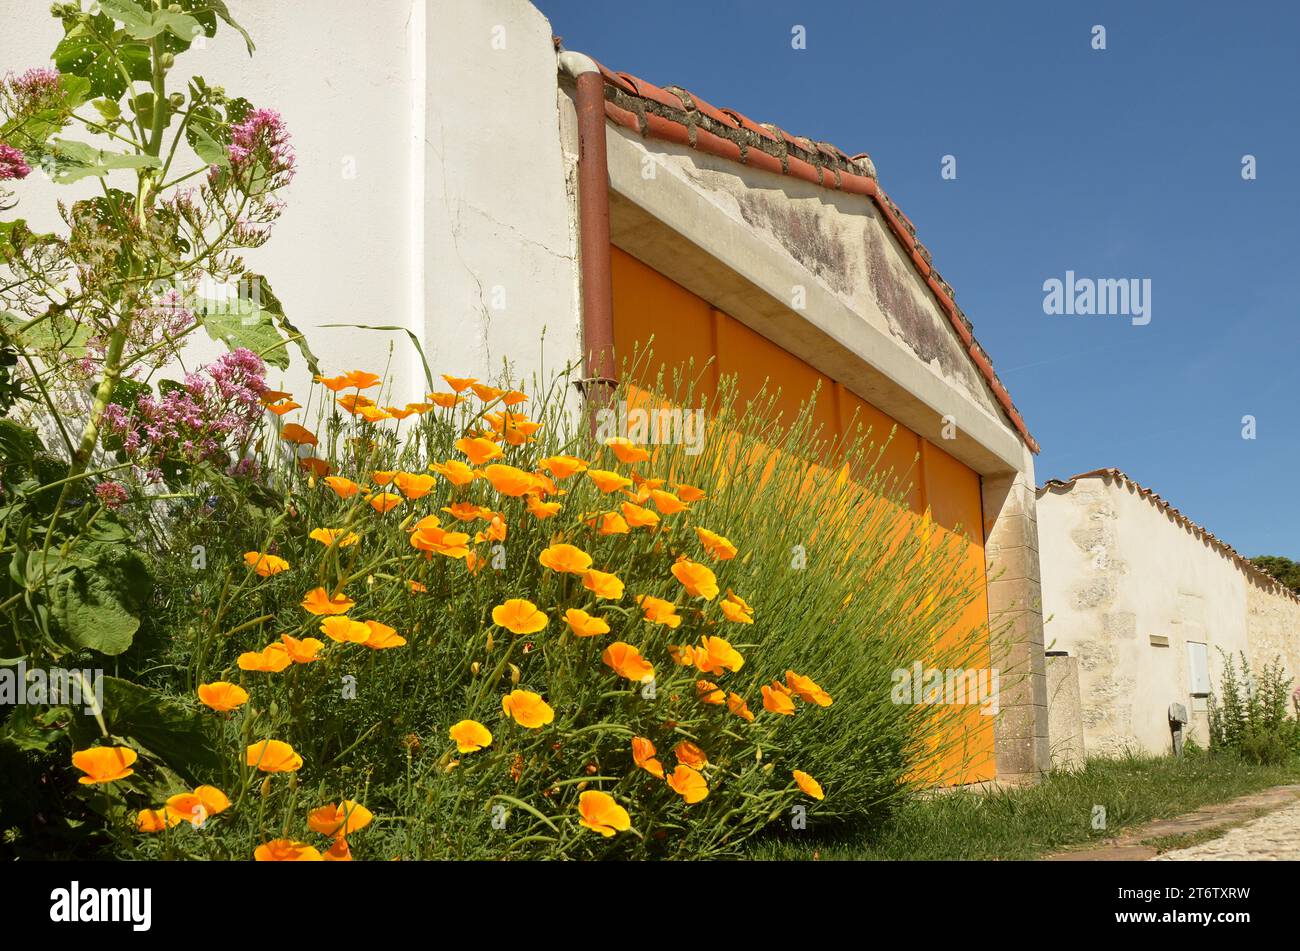 A colorful bouquet before the entrance of a garage in the turistic spot of Talmont sur Gironde in France. Stock Photo